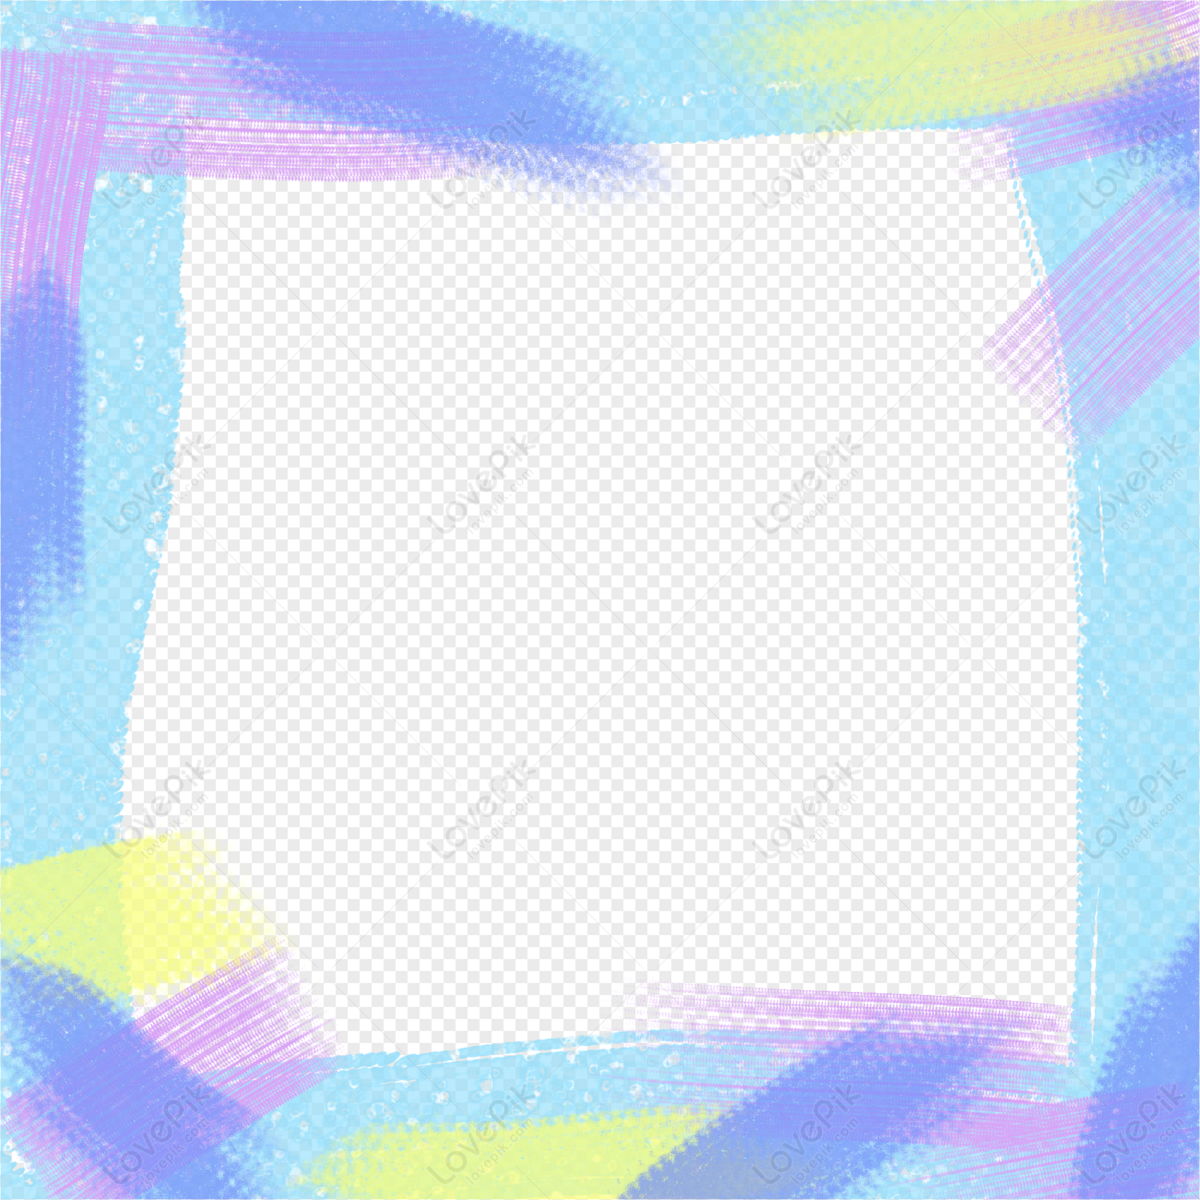 Oil Painting Border PNG Picture And Clipart Image For Free Download -  Lovepik | 401259785